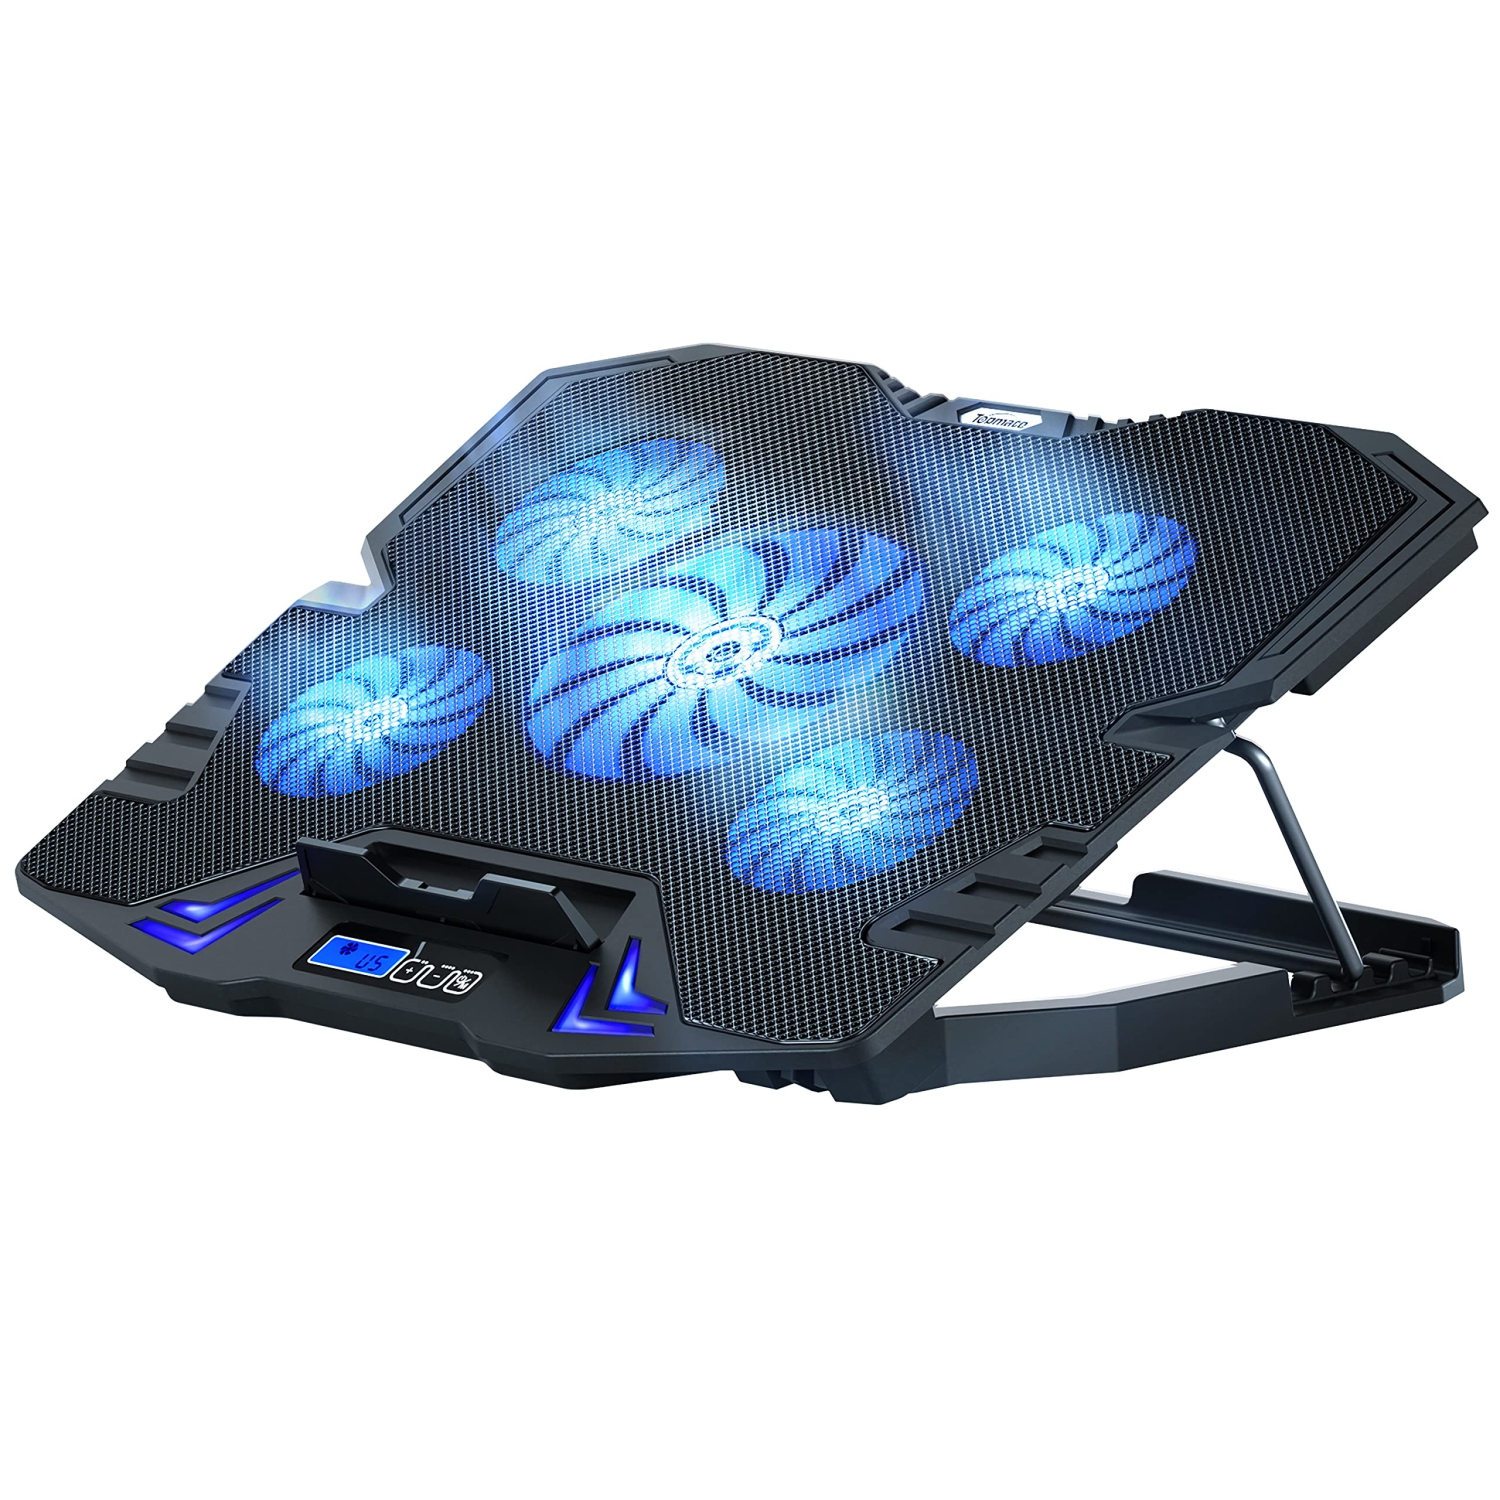 TopMate C5 Laptop Cooling Pad Gaming Notebook Cooler, Laptop Fan Cooling Stand Adjustable Height with 5 Quiet Fans Blue LED